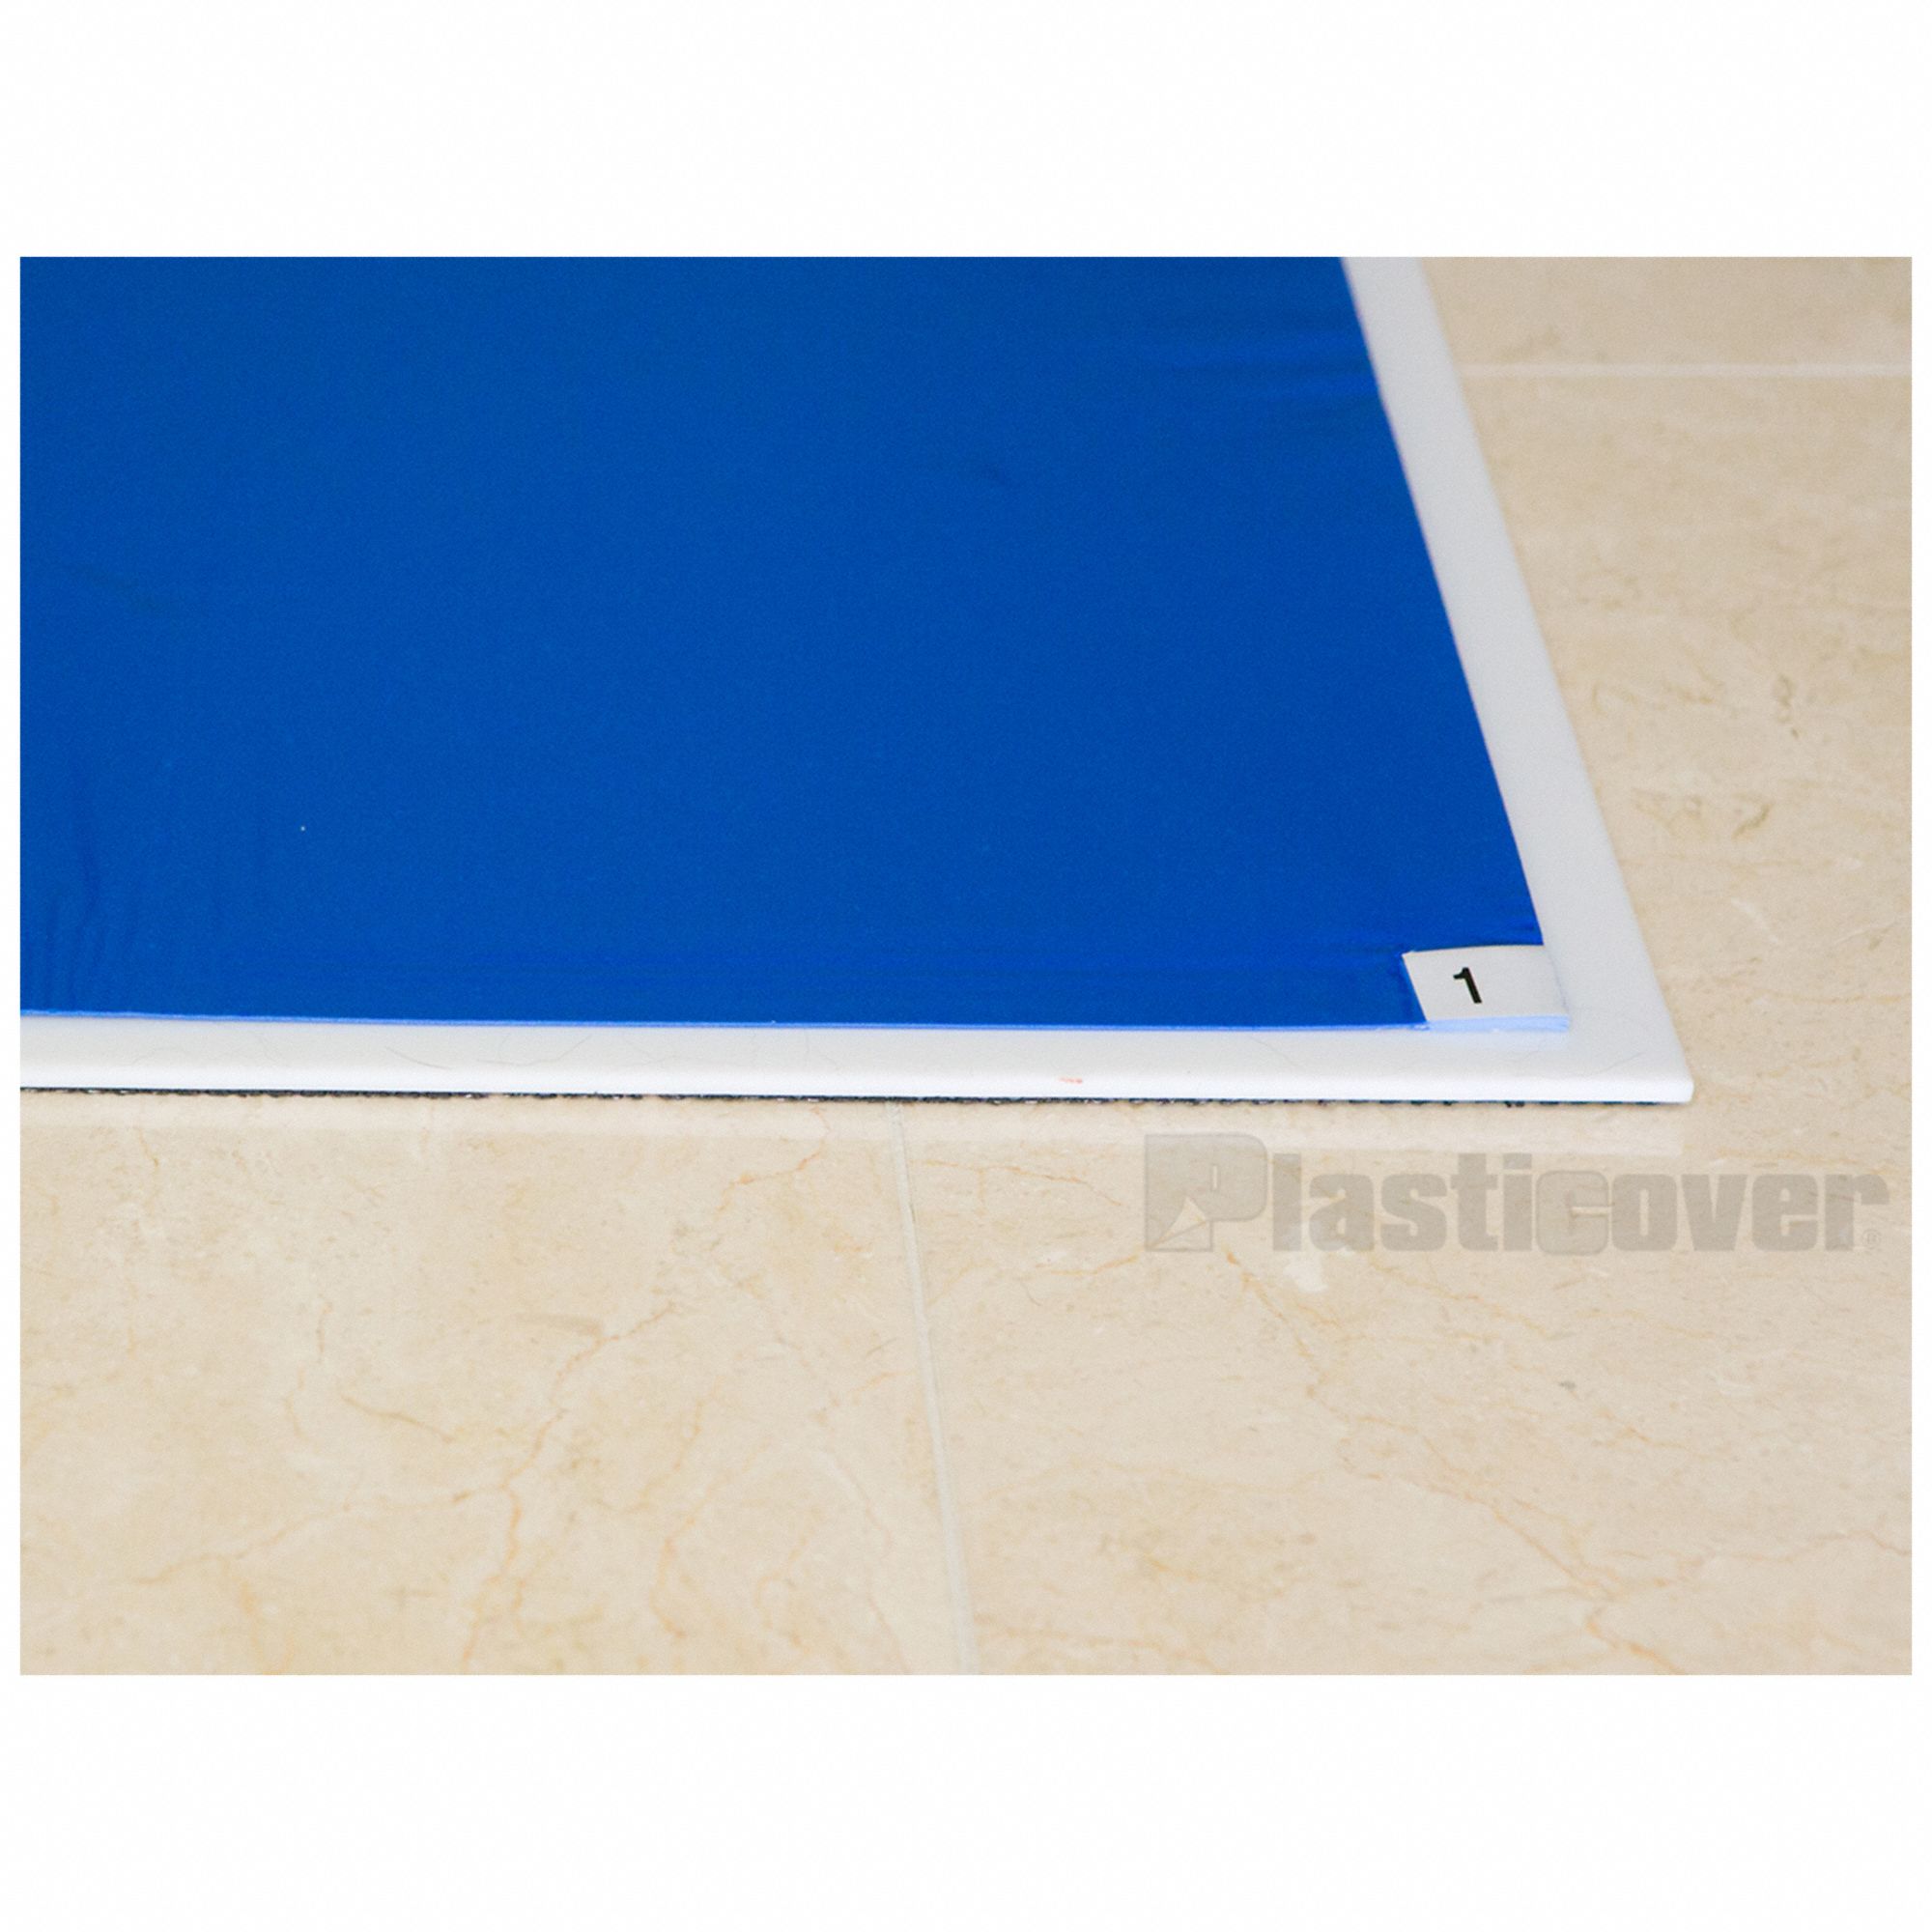 Tacky Floor Mat: 24 in x 36 in Sheet Size (WxL), 1.6 mil Sheet Thick, Polyethylene Film, Blue